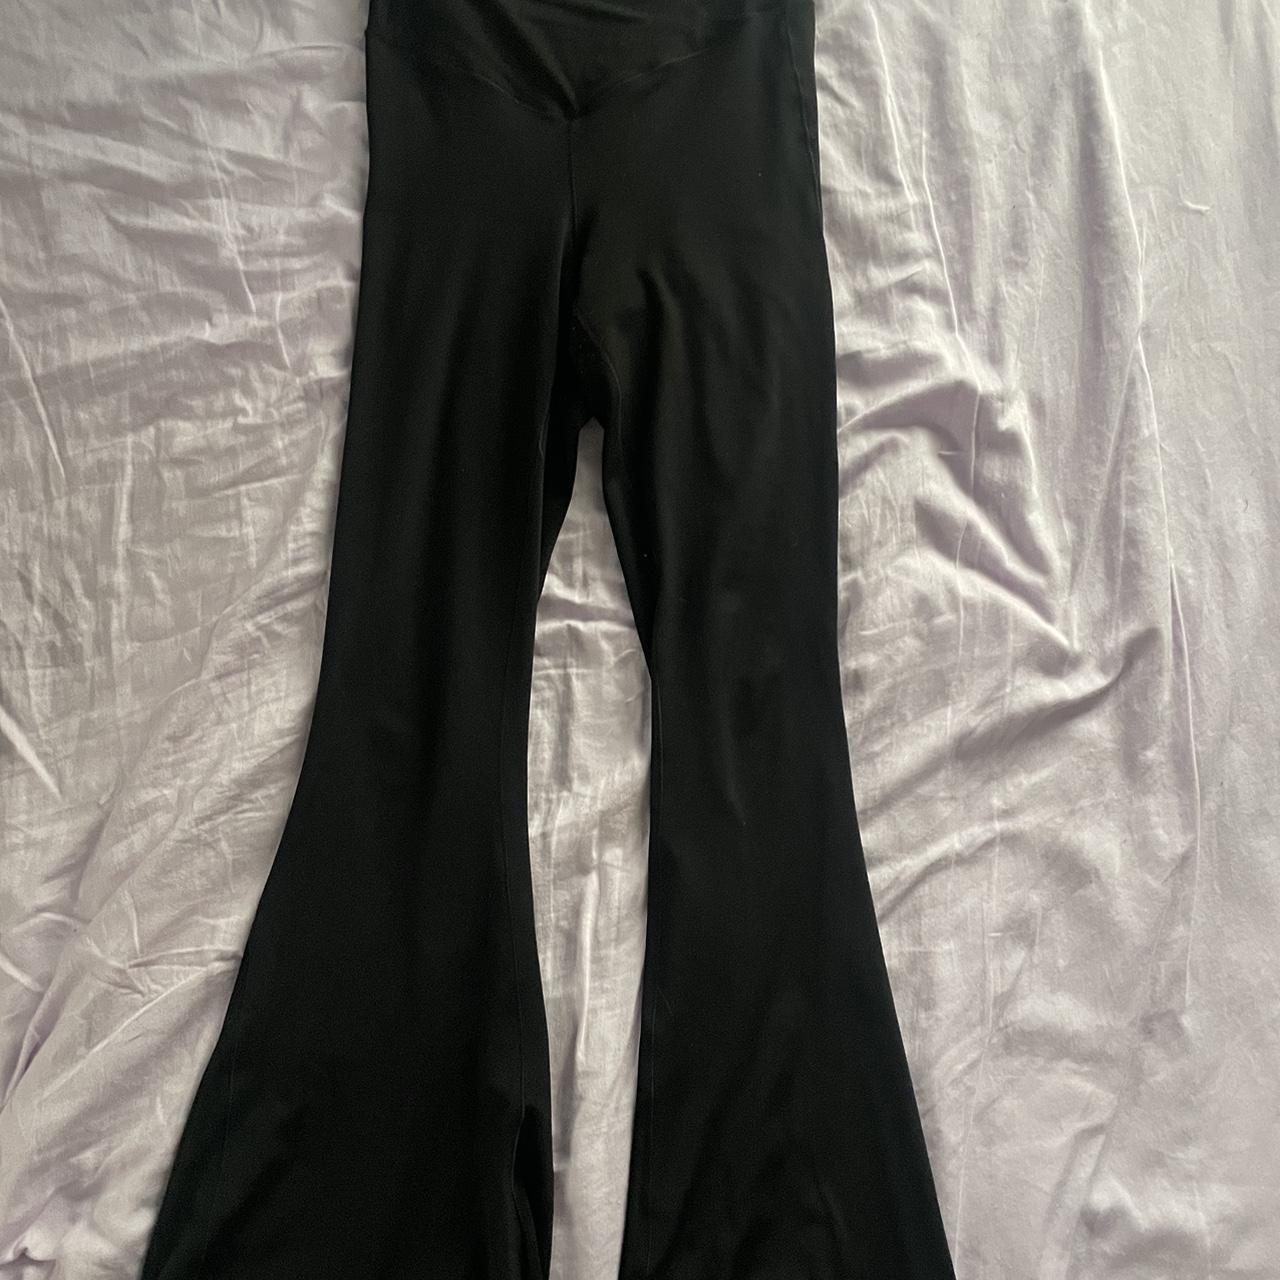 arie crossover flare leggings size small - Depop